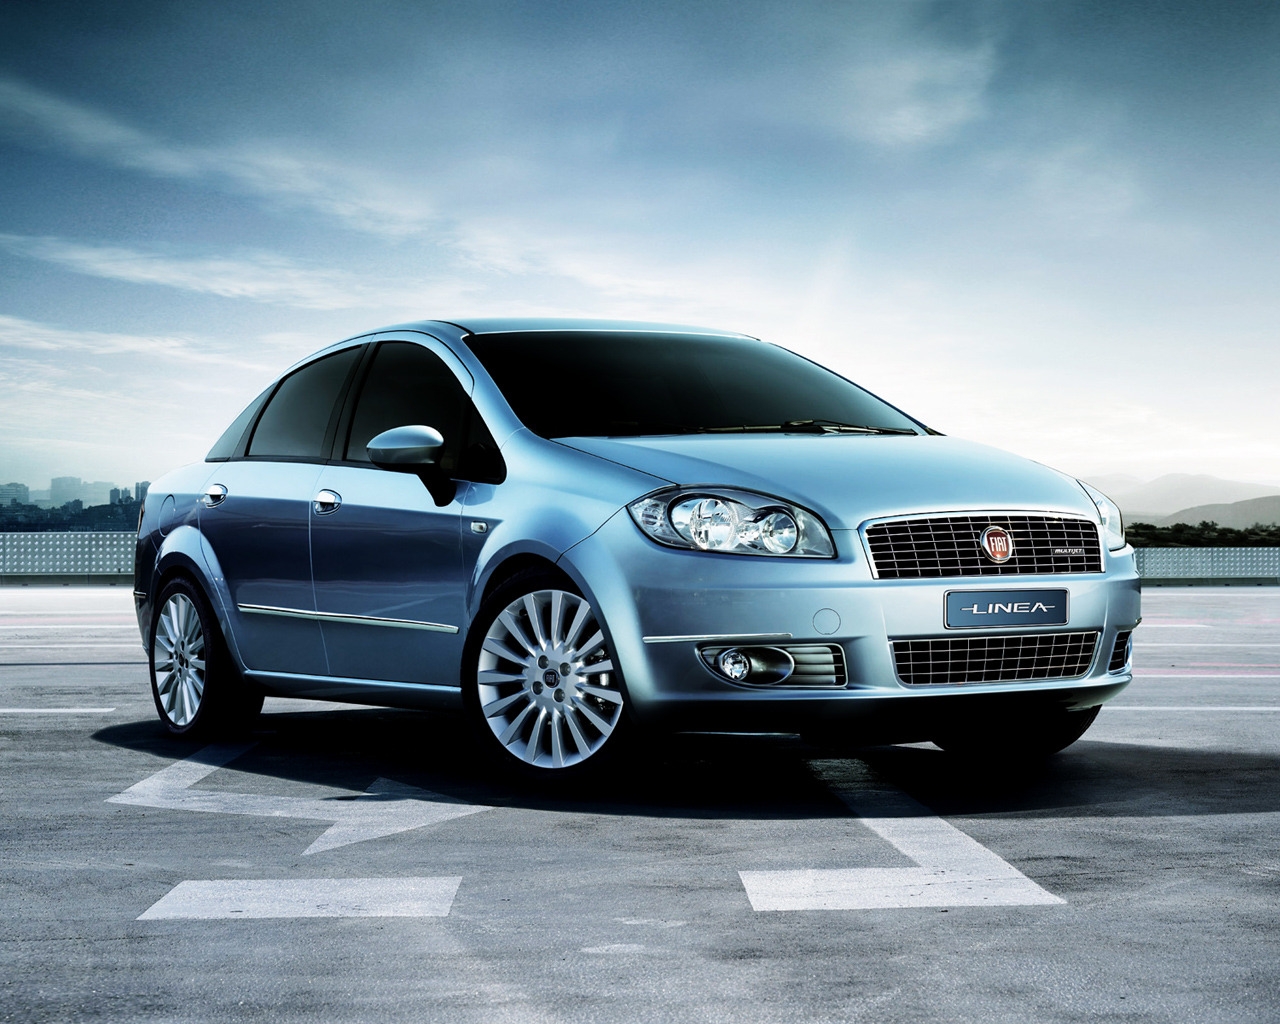 Fiat Linea 2009 for 1280 x 1024 resolution